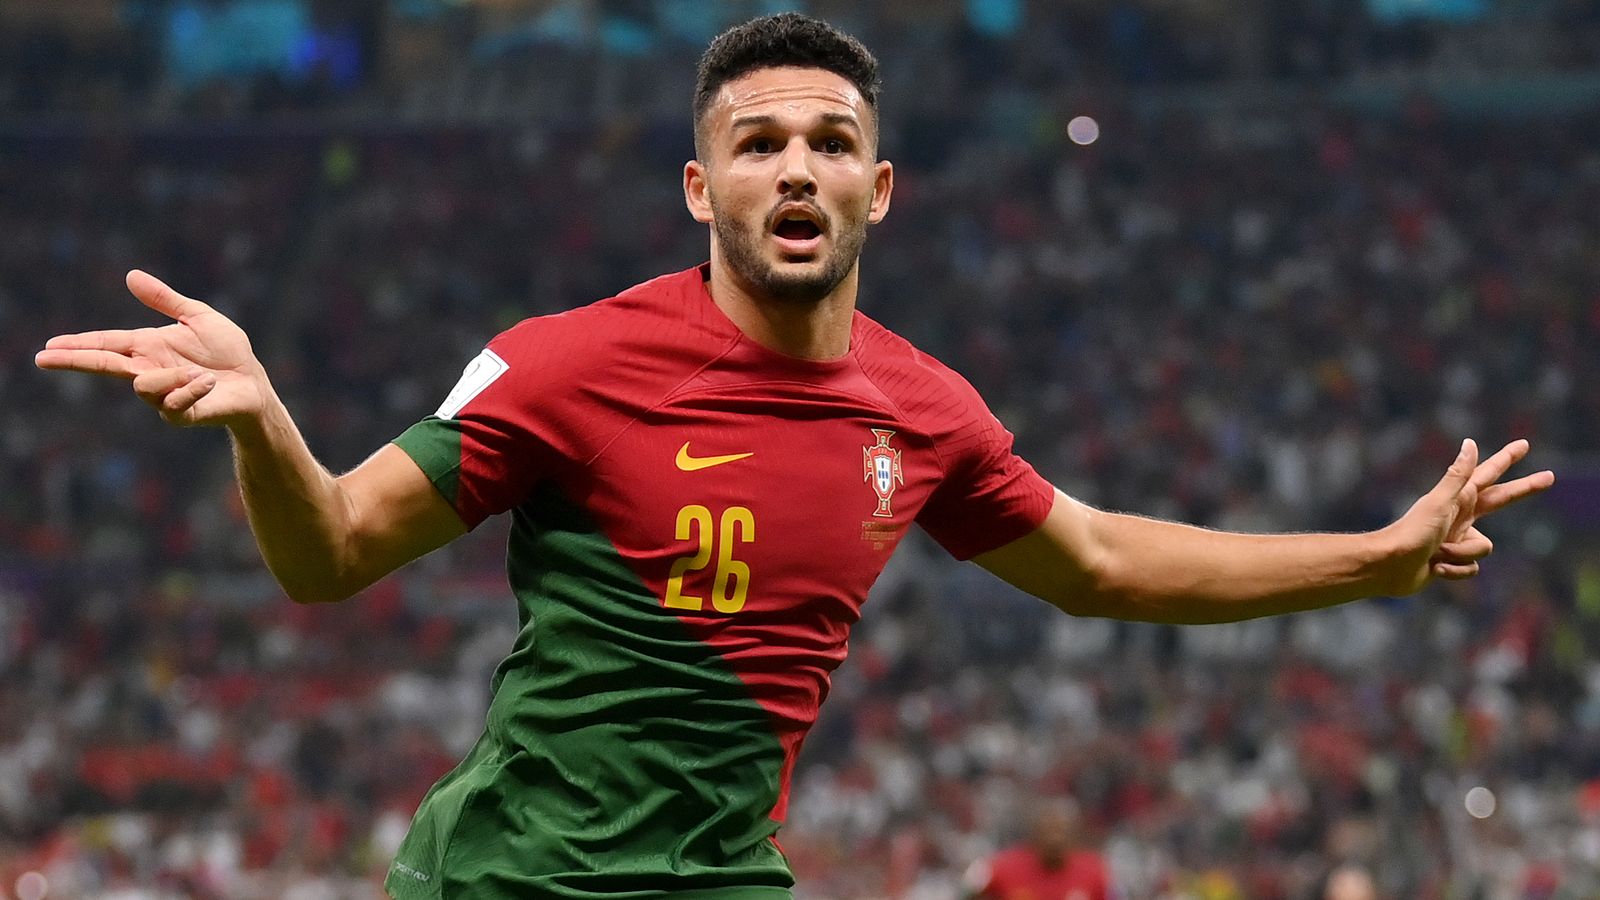 World Cup 2022 - Portugal 6-1 Switzerland: Goncalo Ramos nets hat-trick as dropped Cristiano Ronaldo watches on | Football News | Sky Sports